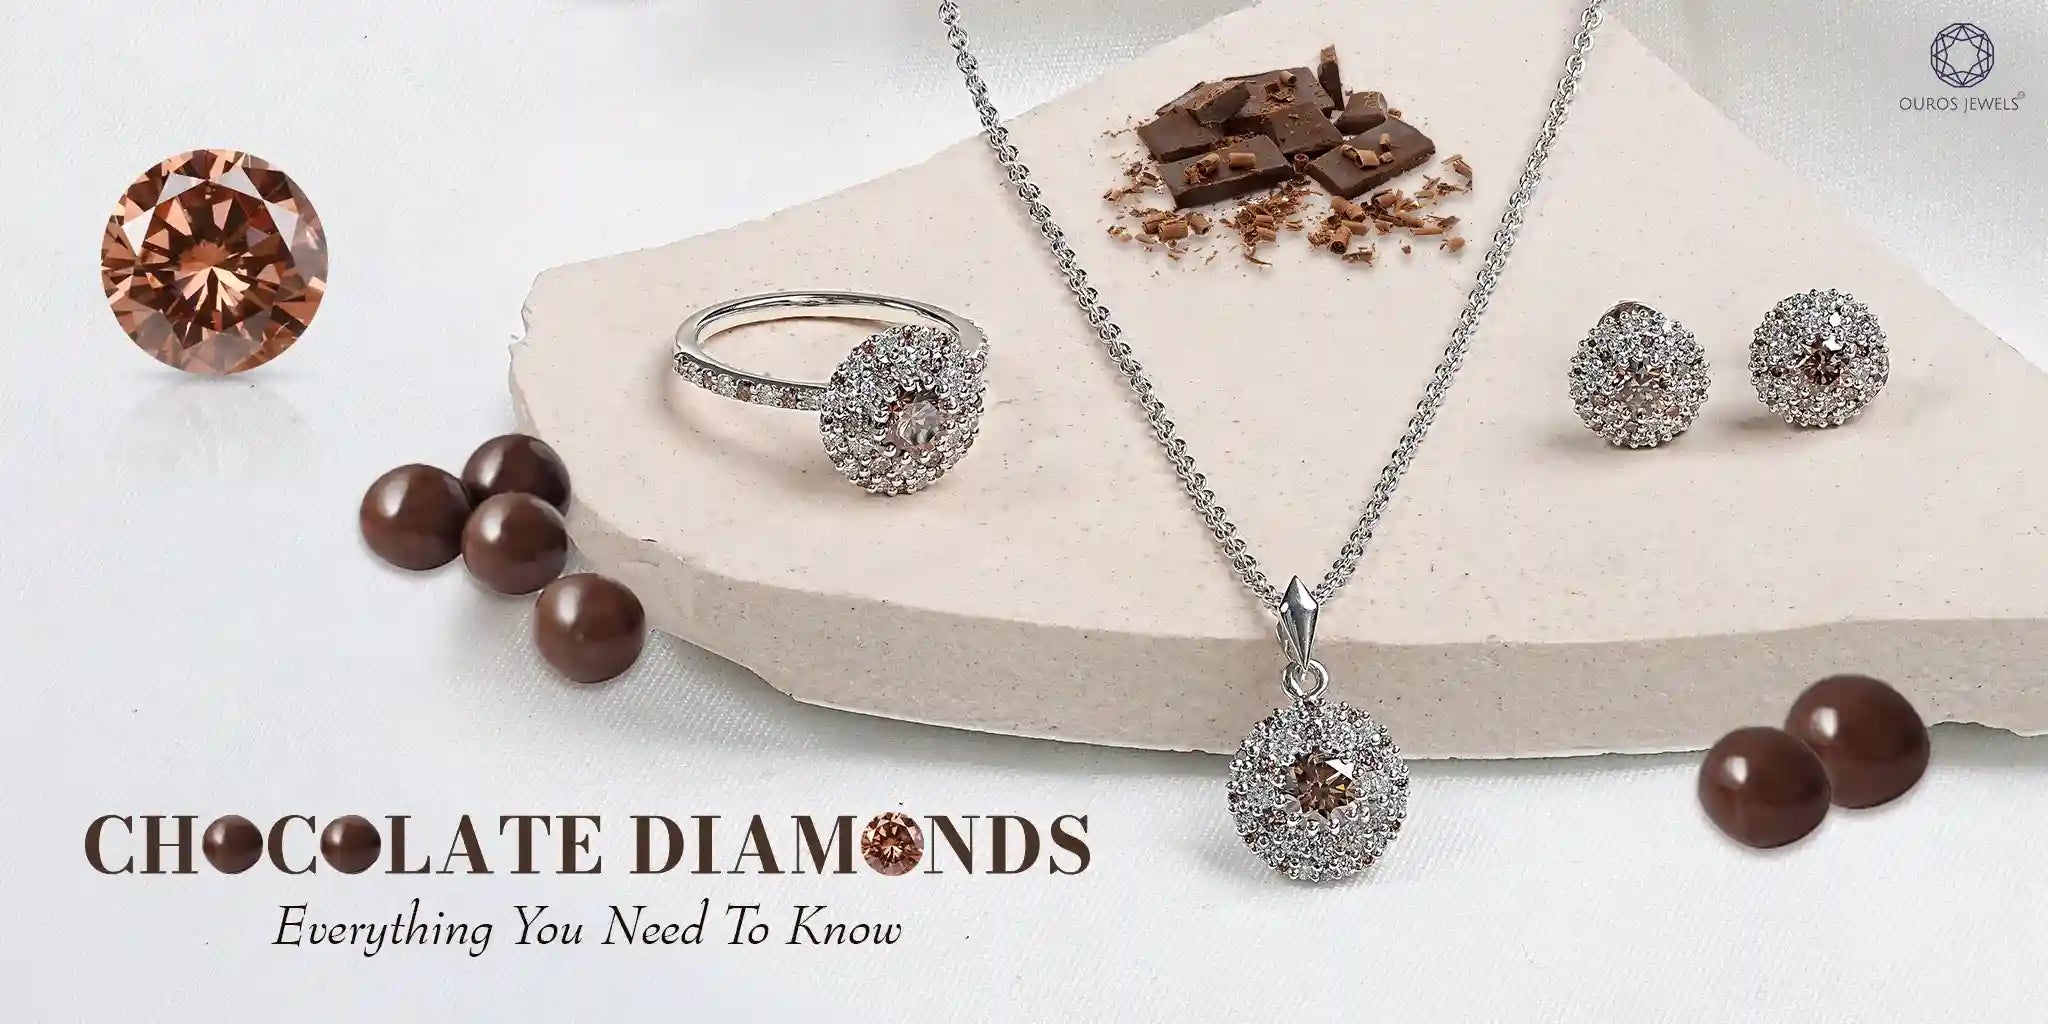 [Chocolate Diamonds - Everything You Need to Know. Elegant jewelry set featuring chocolate diamonds, including a ring, necklace, and earrings with sparkling halos, alongside chocolate pieces.]-[ouros jewels]